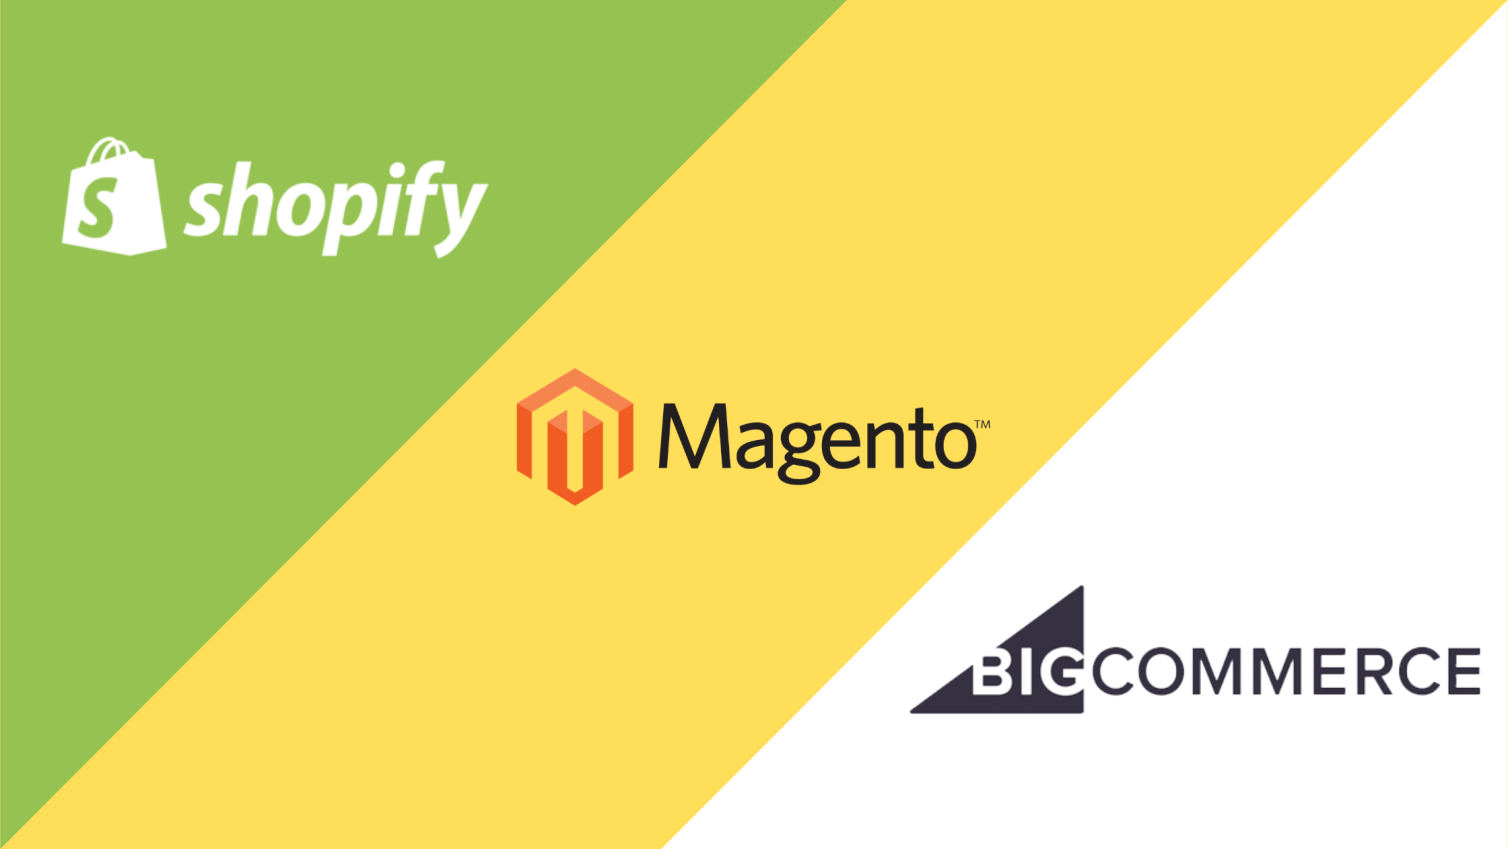 Best E-commerce Platform to Choose in 2021: Shopify, Magento, or BigCommerce?